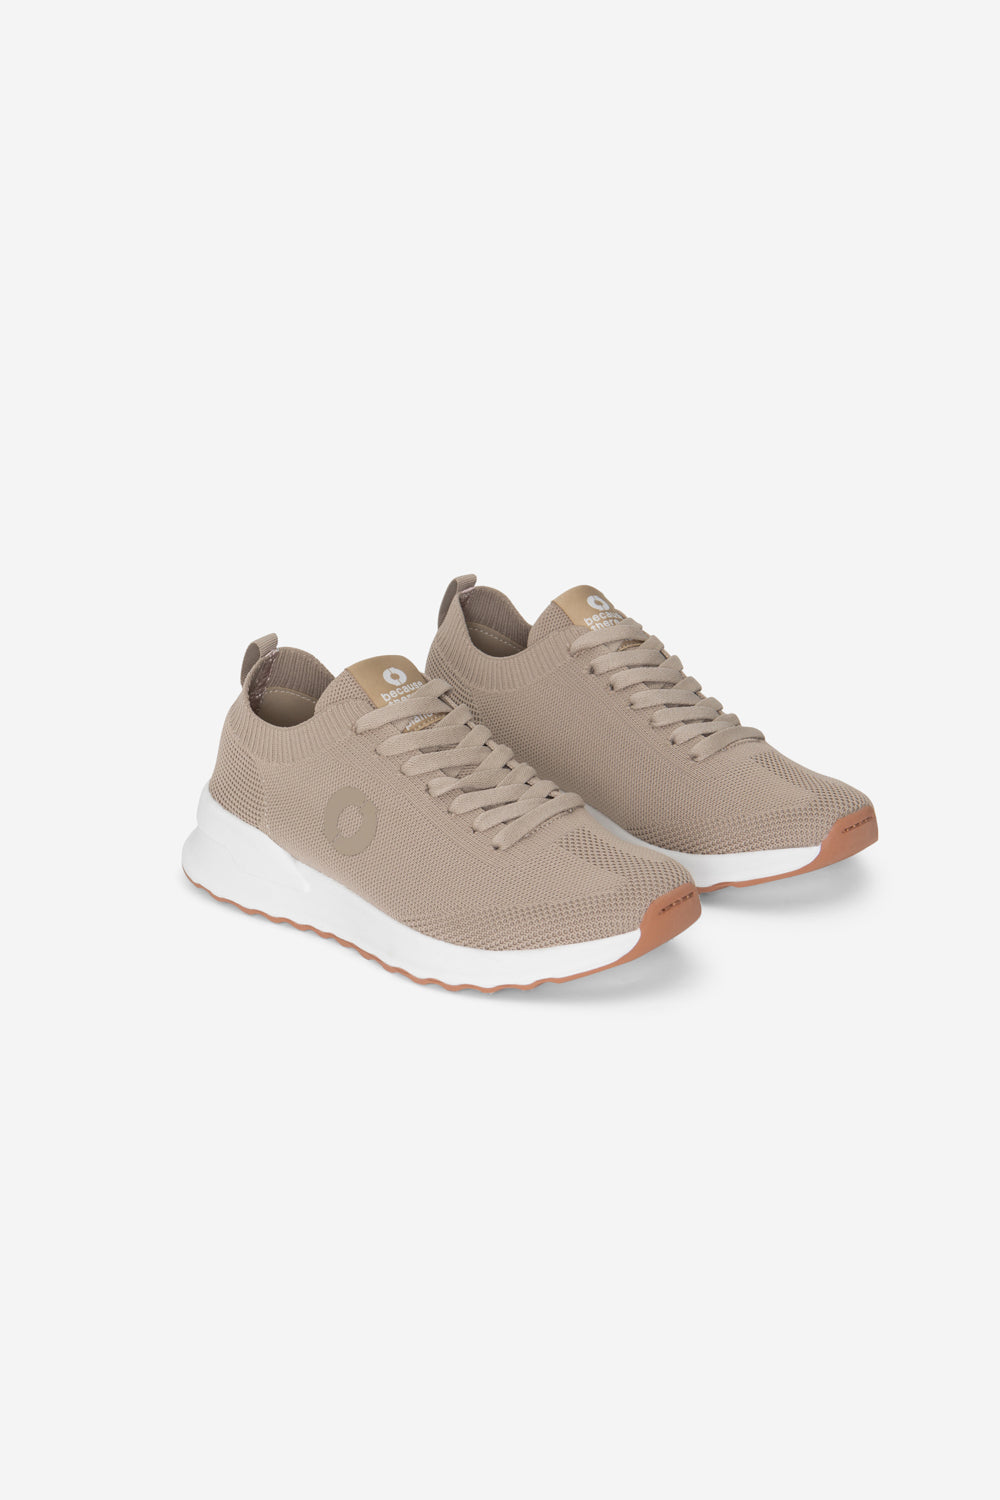 PRINCE KNIT TRAINERS BEIGE